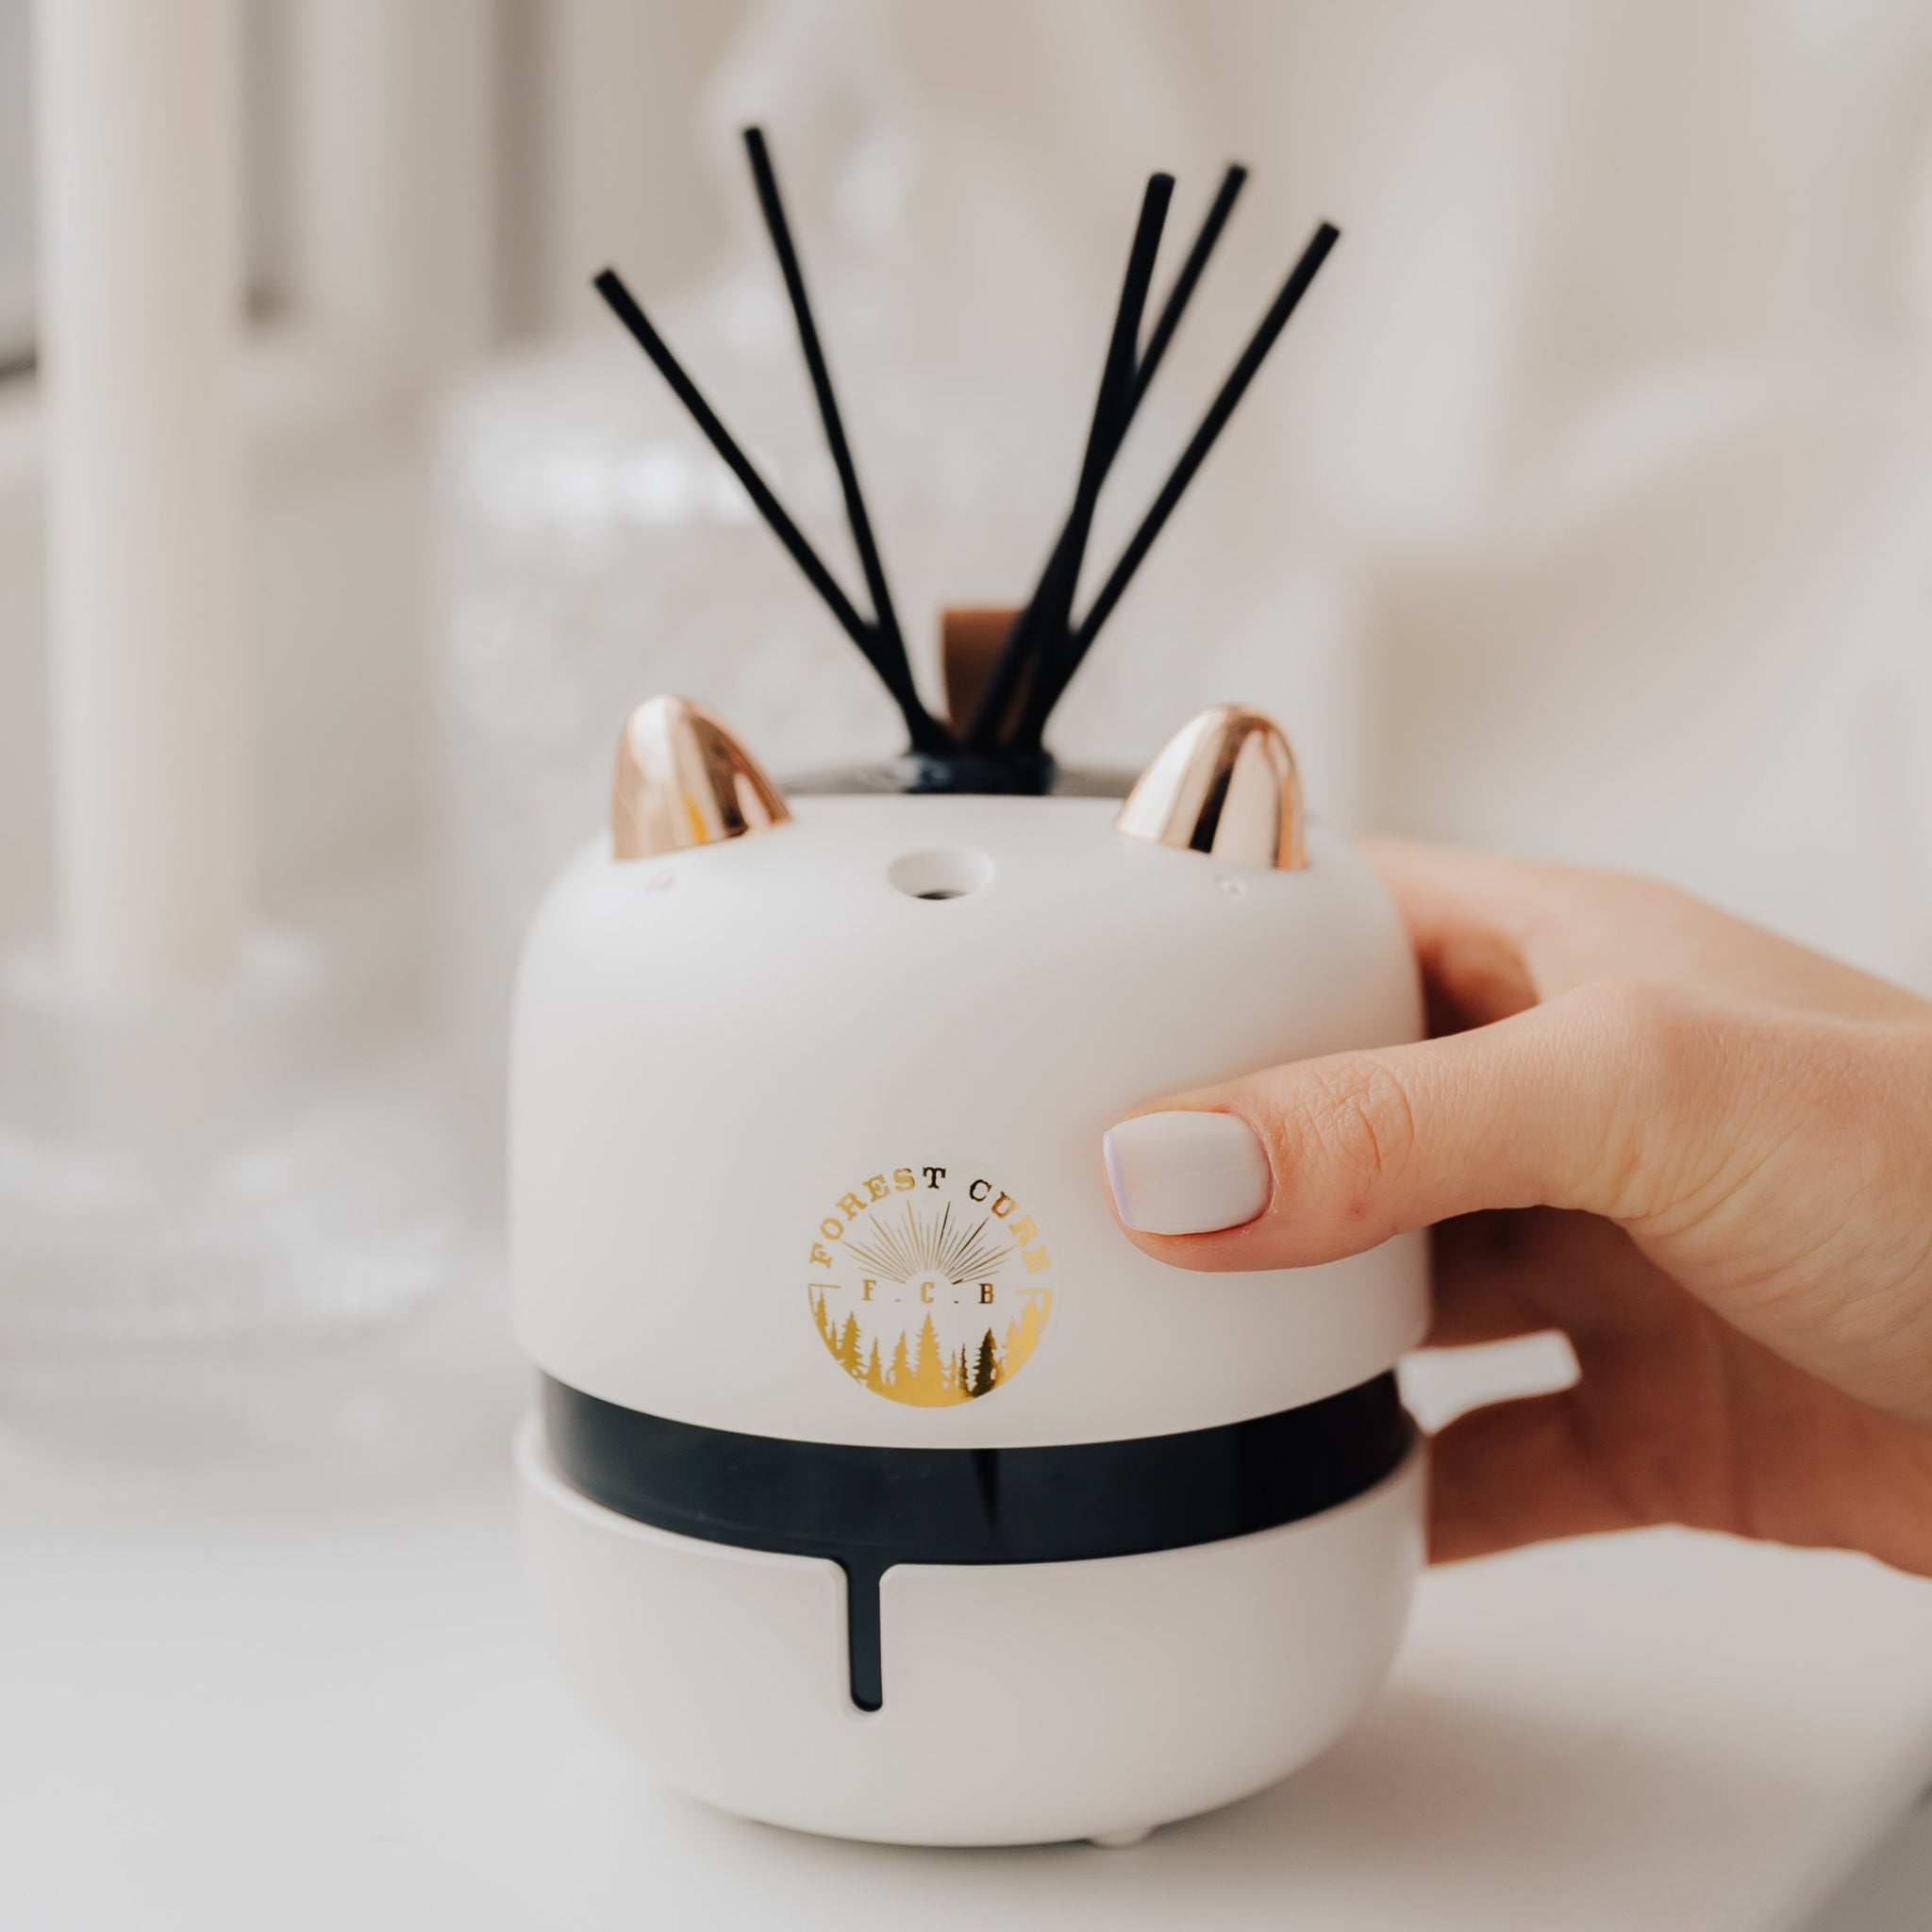 3 in 1 Humidifier With Essential Oil Diffuser and Night Light